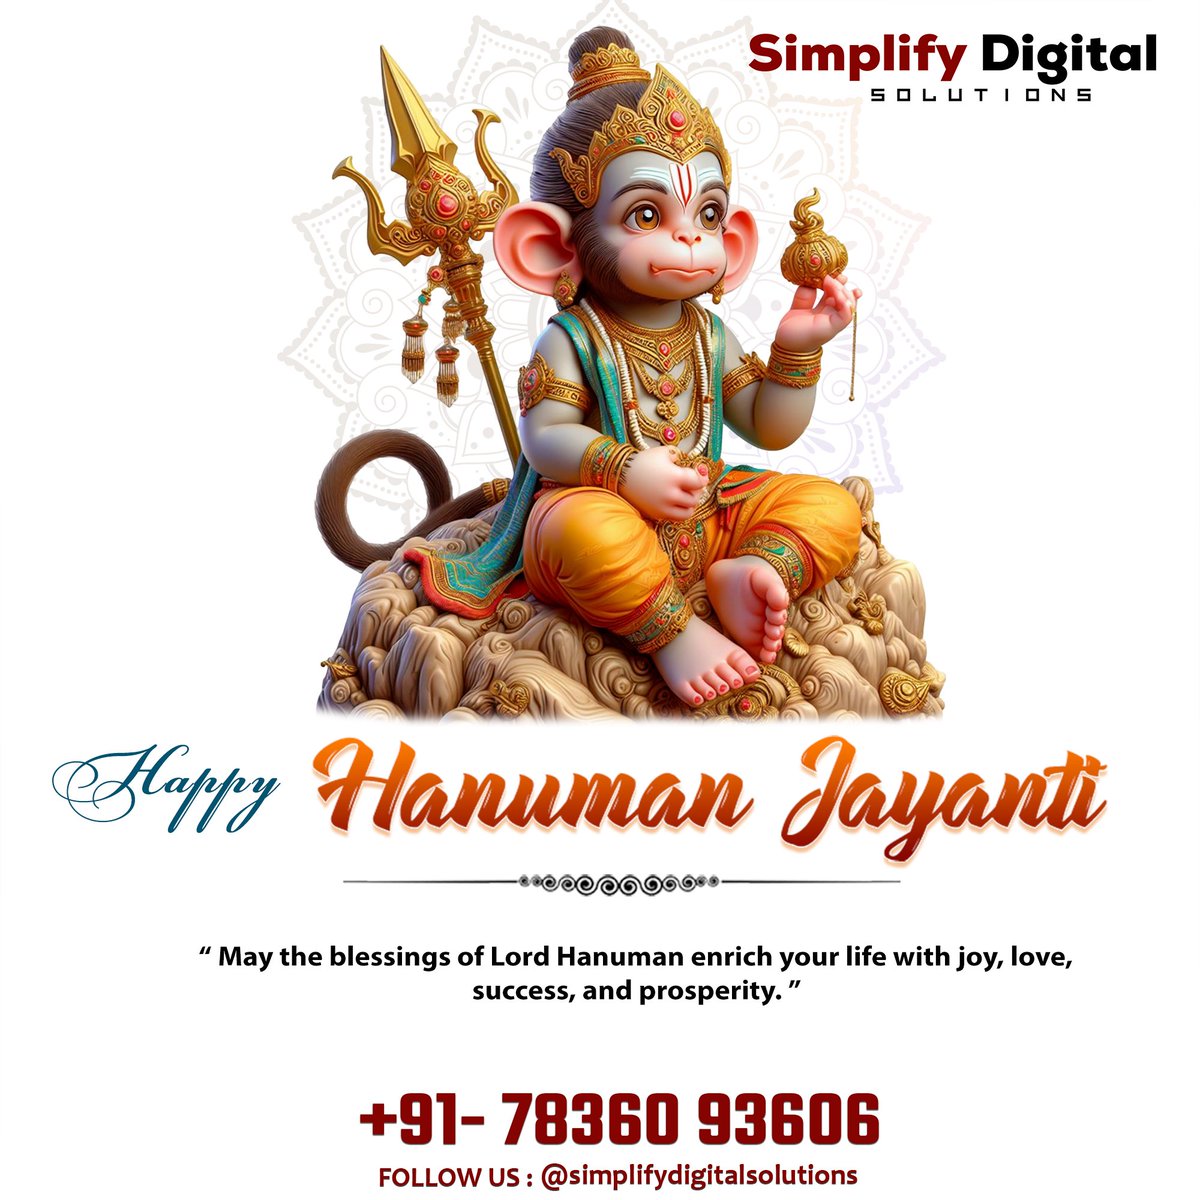 𝗛𝗮𝗽𝗽𝘆 𝗛𝗮𝗻𝘂𝗺𝗮𝗻 𝗝𝗮𝘆𝗮𝗻𝘁𝗶

“ May the blessings of Lord Hanuman enrich your life with joy, love,
success, and prosperity. ”
.
.
.
#simplifydigitsolution #happyhanumanjayanti #happyhanumanjayanti2024 #hanumanjayanti2024 #hanumanjayanti